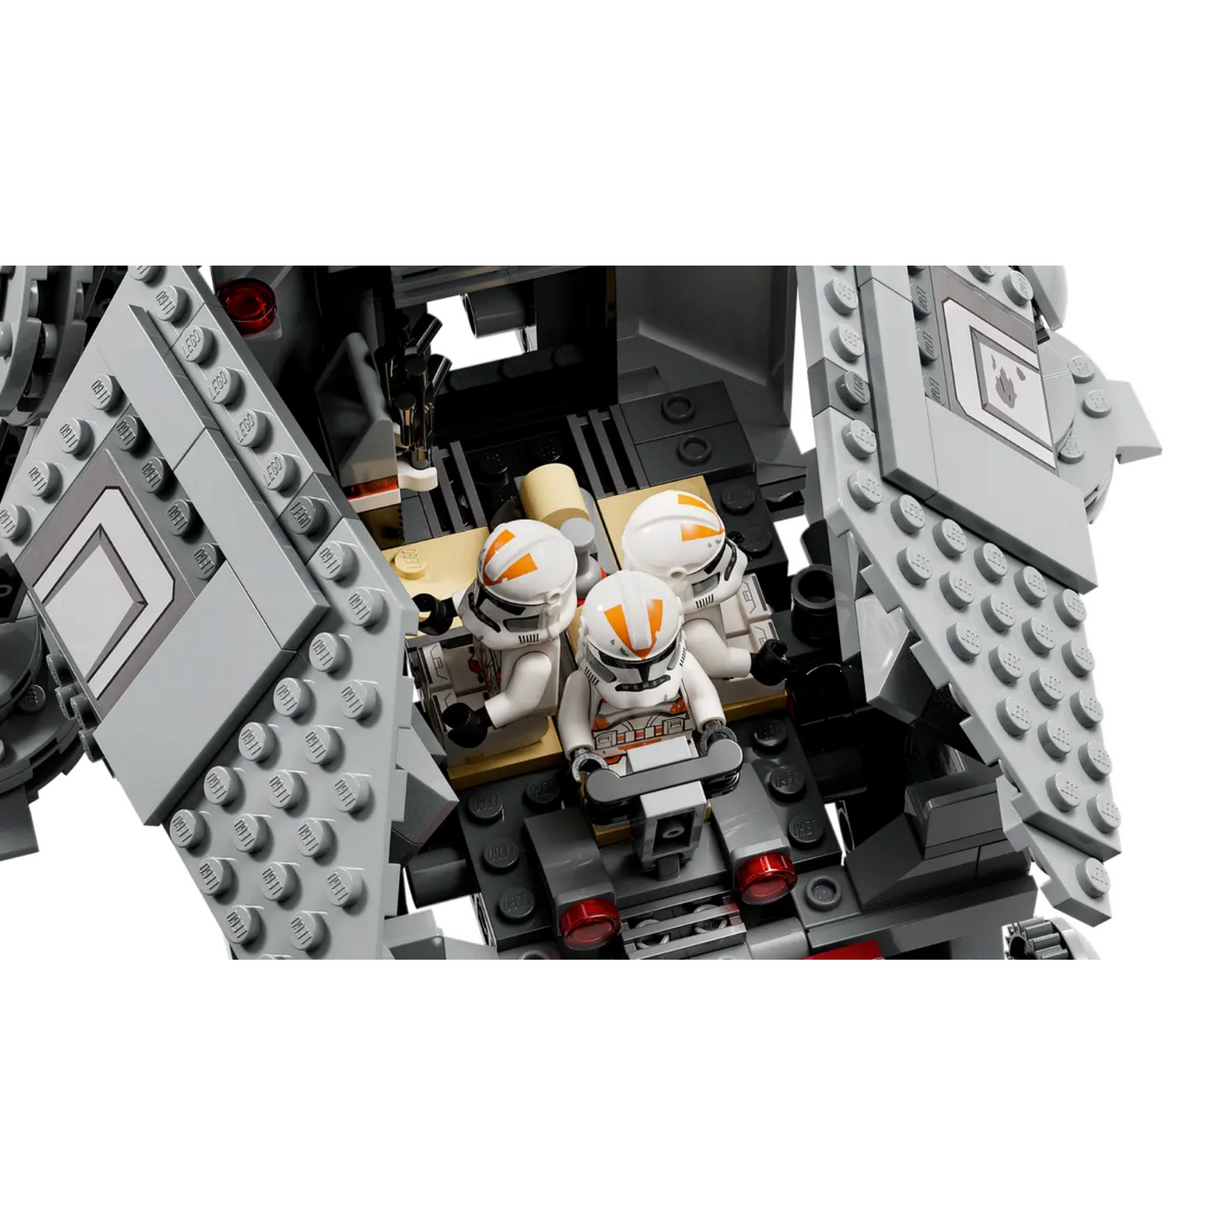 Lego® Star Wars™ At-Te™ Walker 75337 Building Kit (1,082 Pieces)